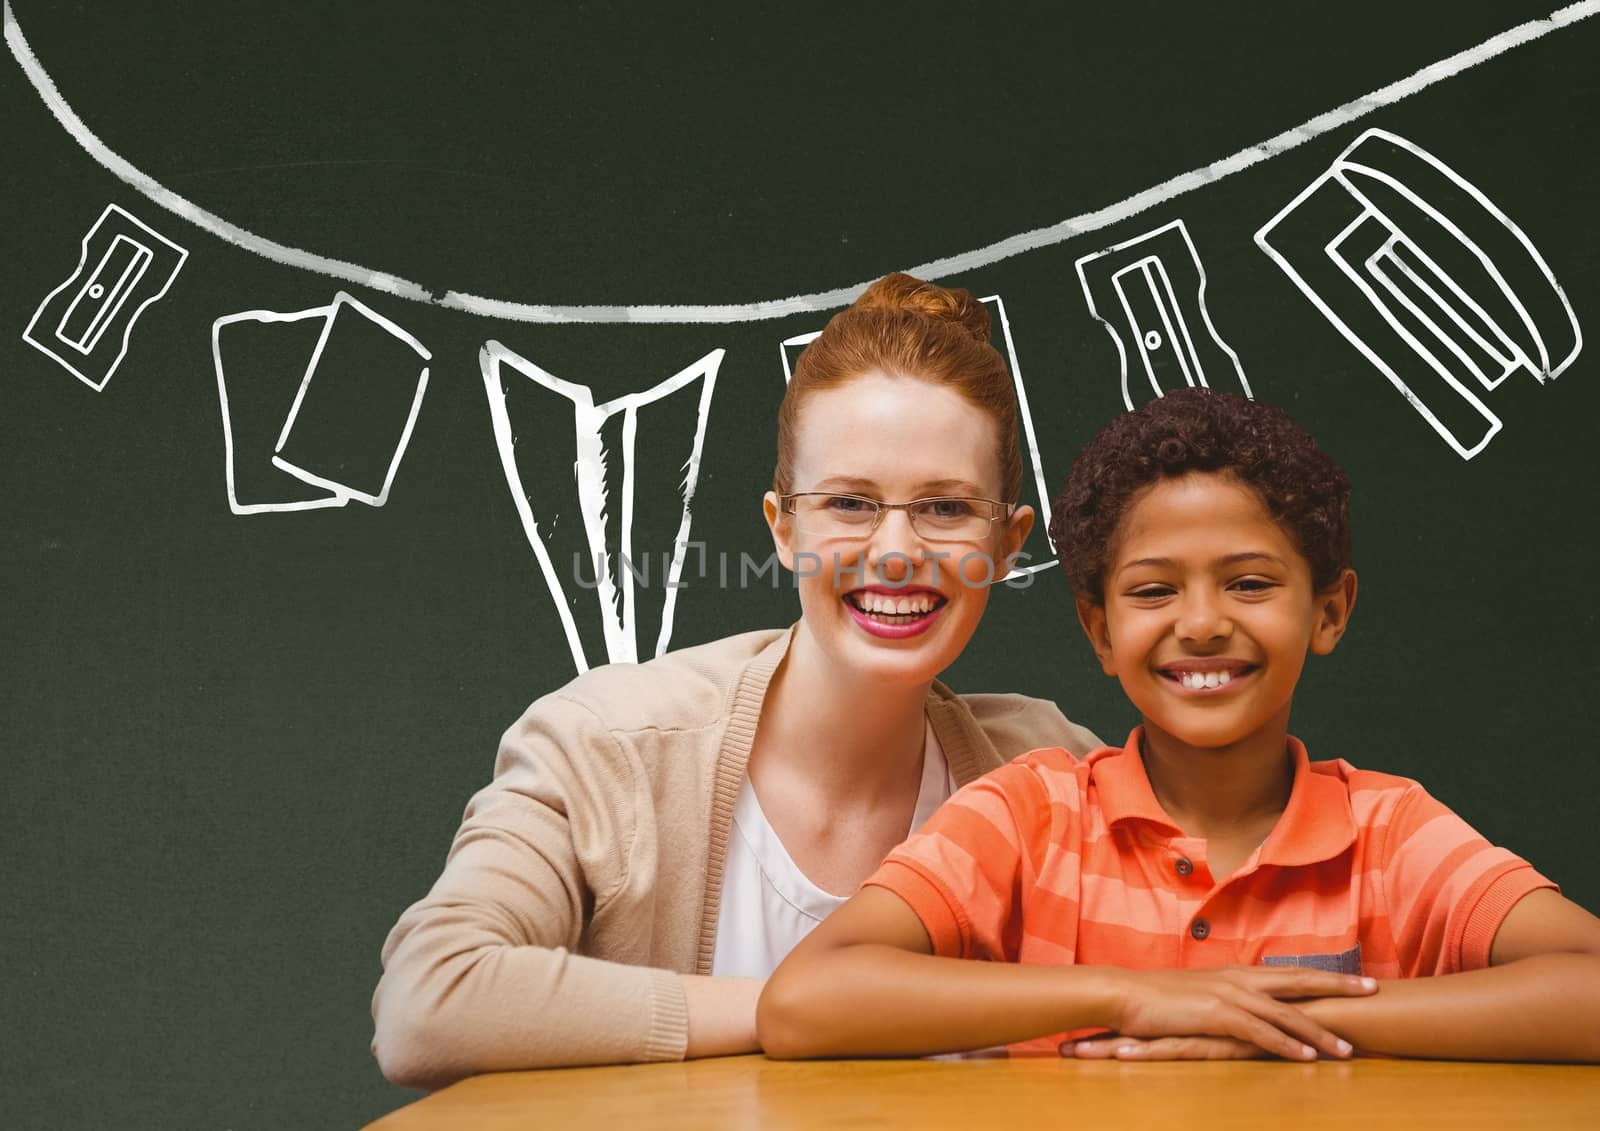 Student boy and teacher at table smiling against green blackboard with school and education graphic by Wavebreakmedia